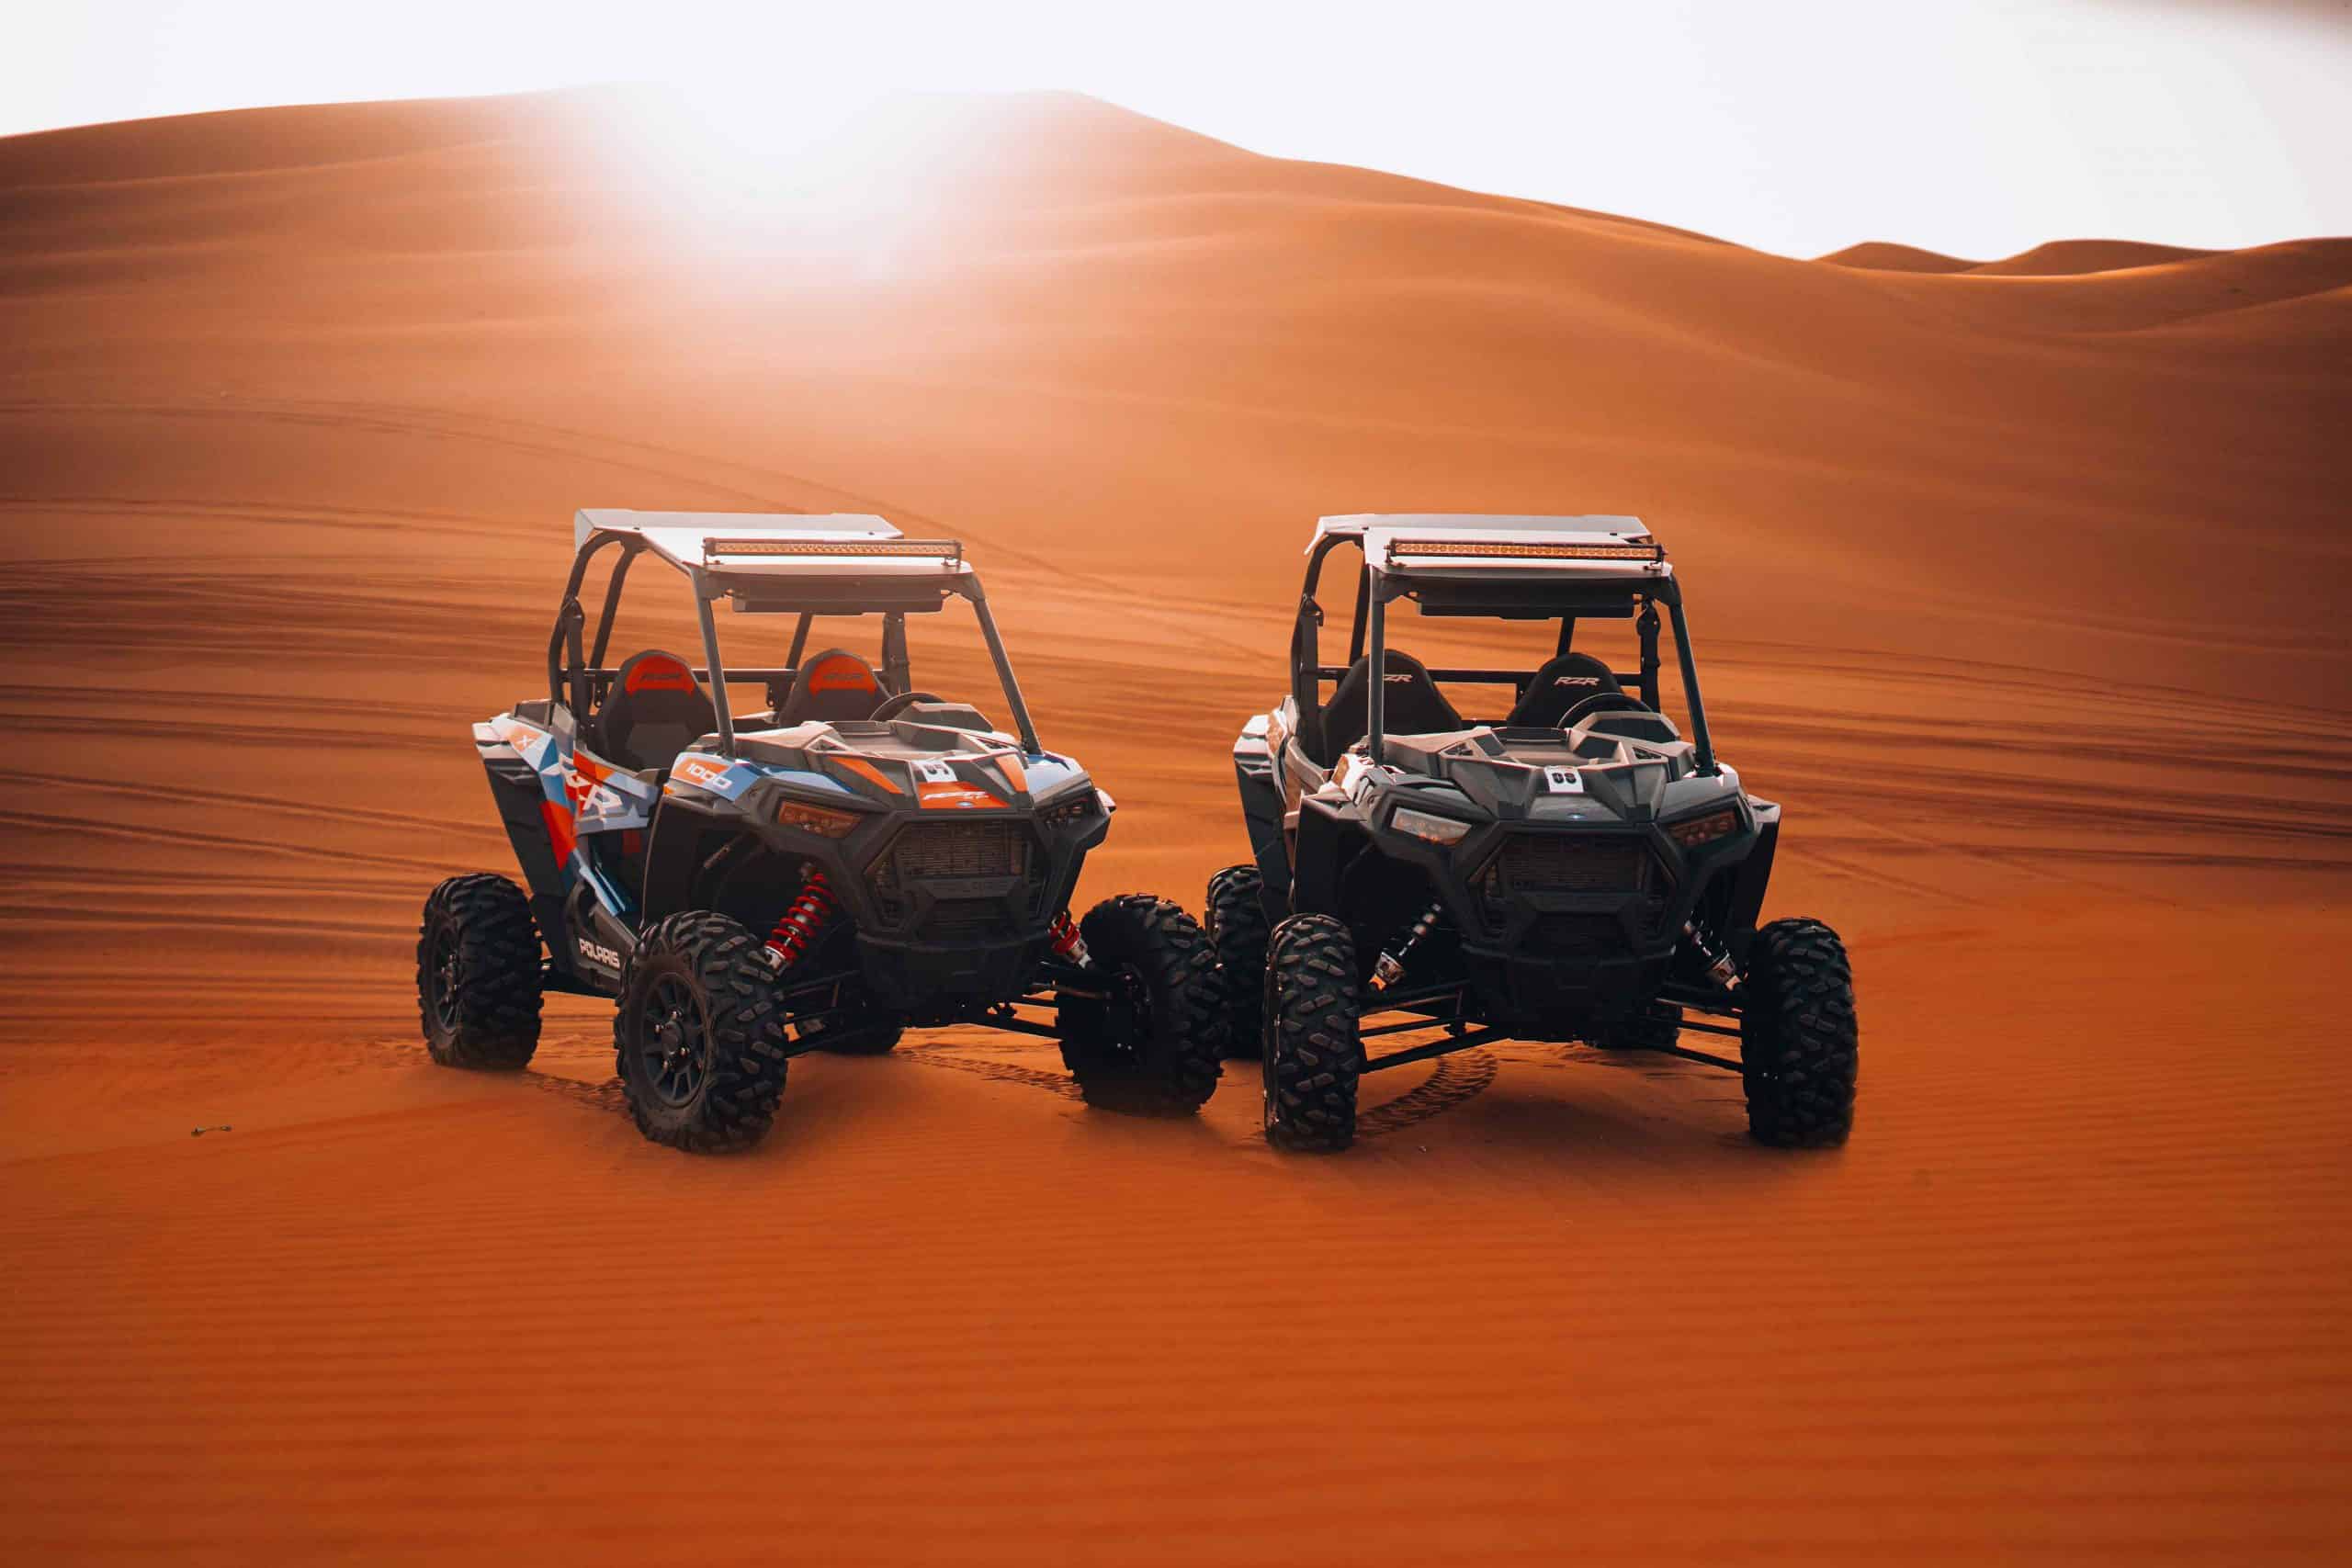 Why Go Quad Biking? Here Are Some Undeniable Reasons